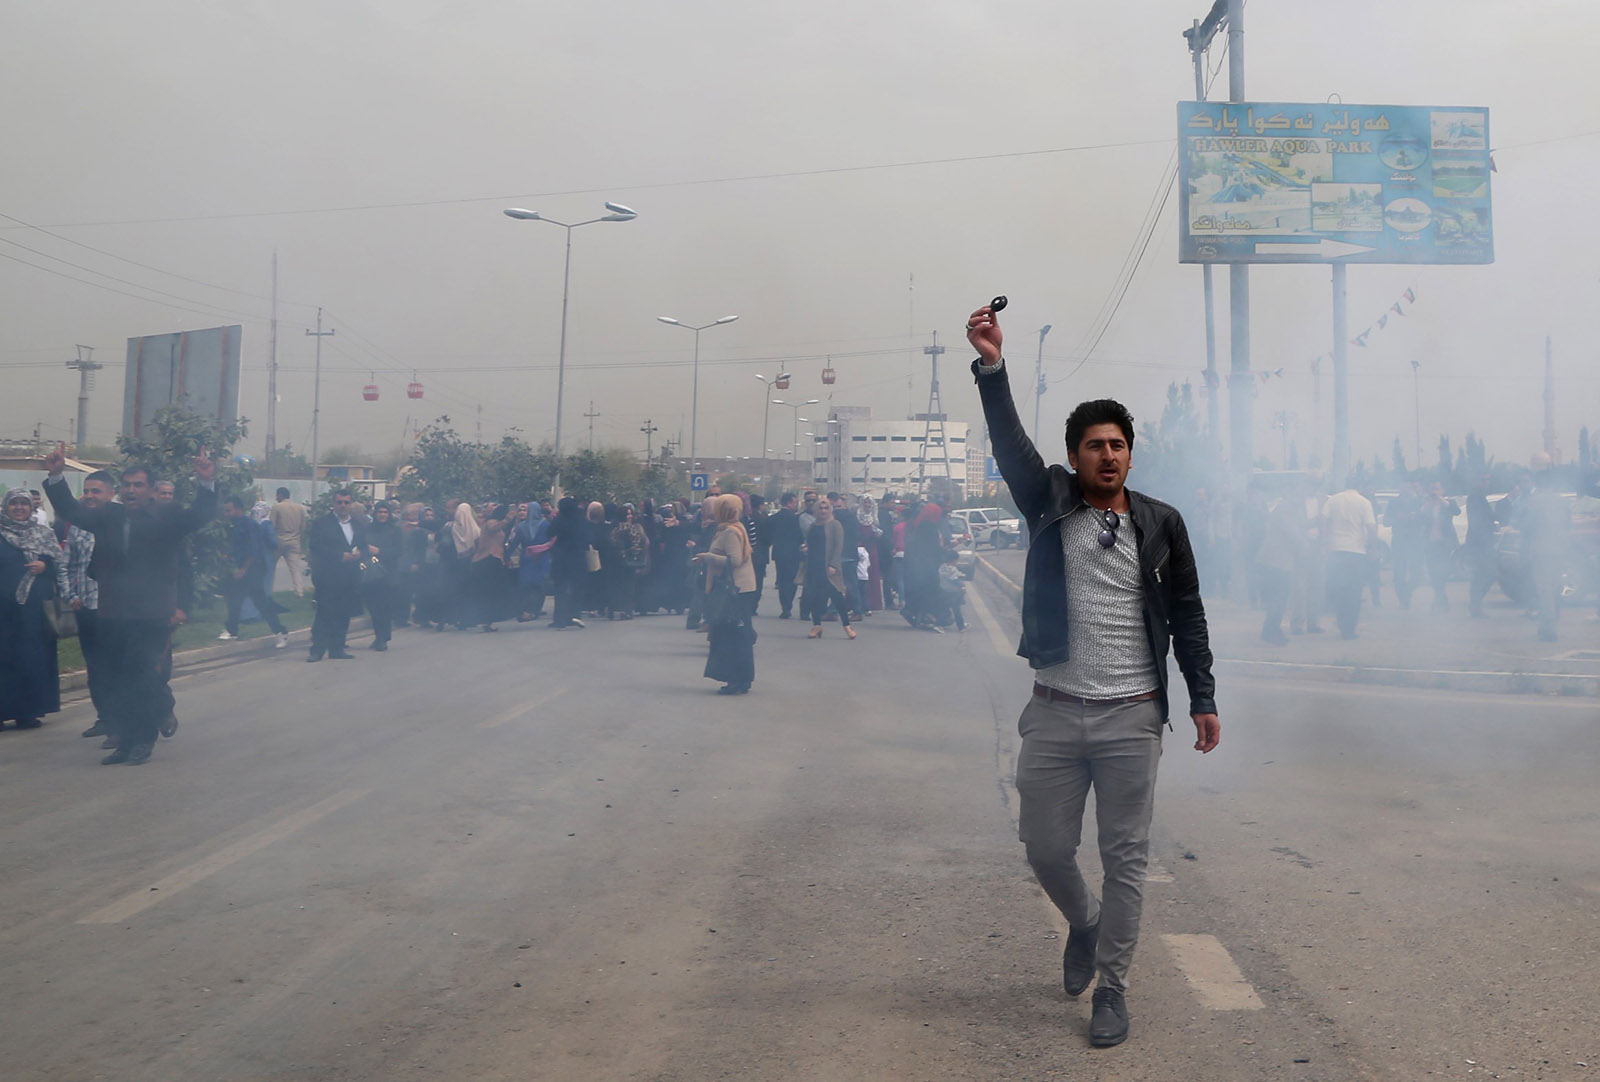 Teargas filling the air as Kurdish government police tried to disperse a protest of civil servants in Erbil, Iraq, March 25, 2018